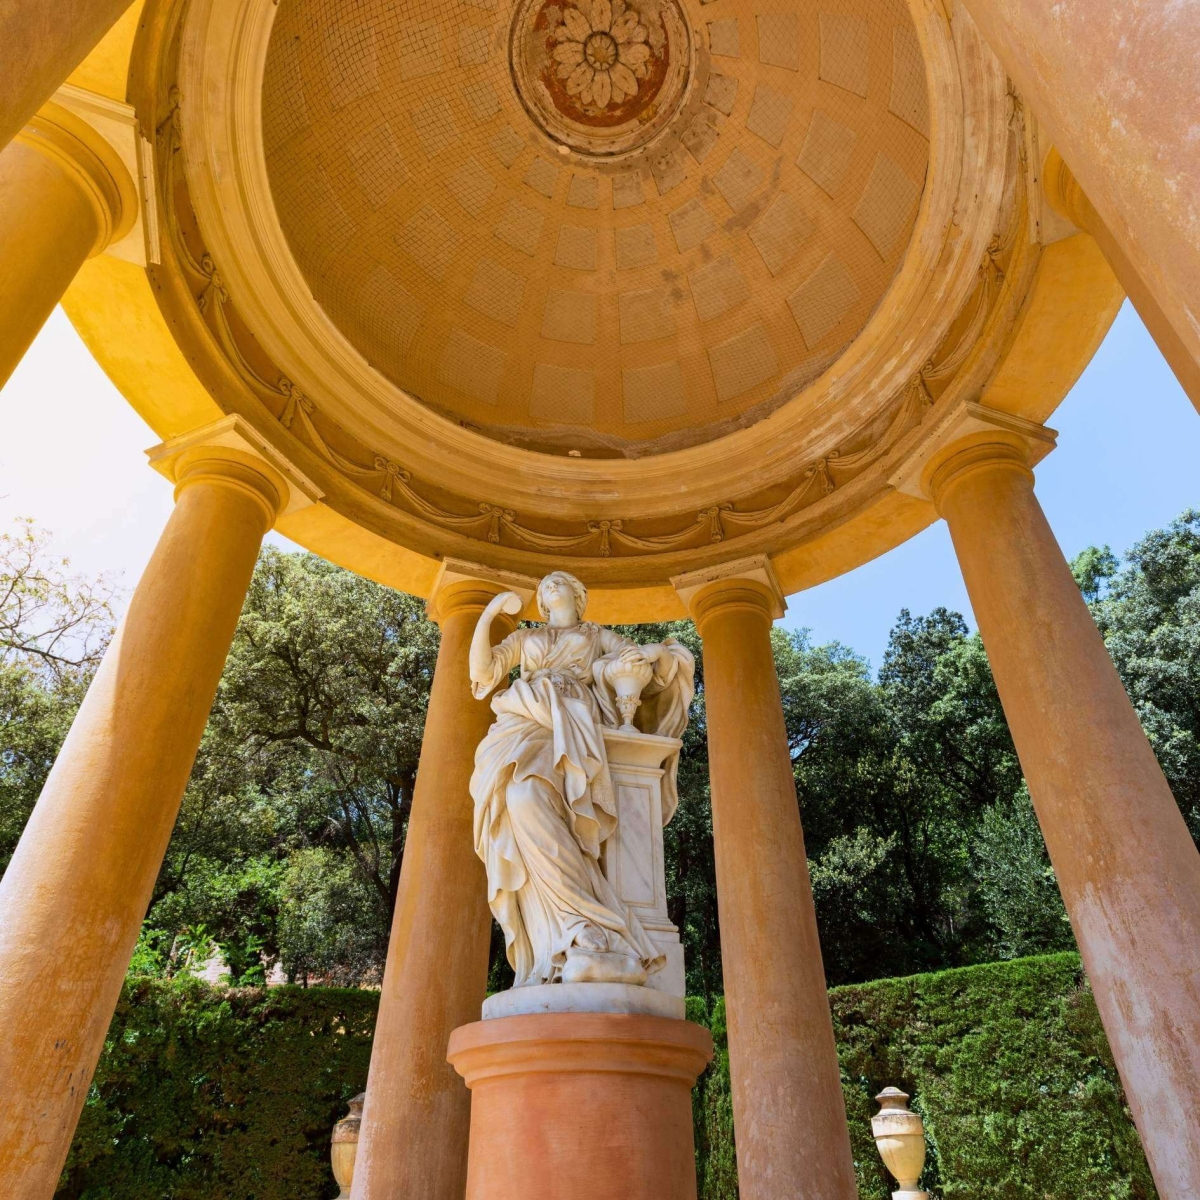 Pavilion with sculpture in in Park of the Labyrinth of Horta (Parc del Laberint d'Horta) in Barcelona, Spain